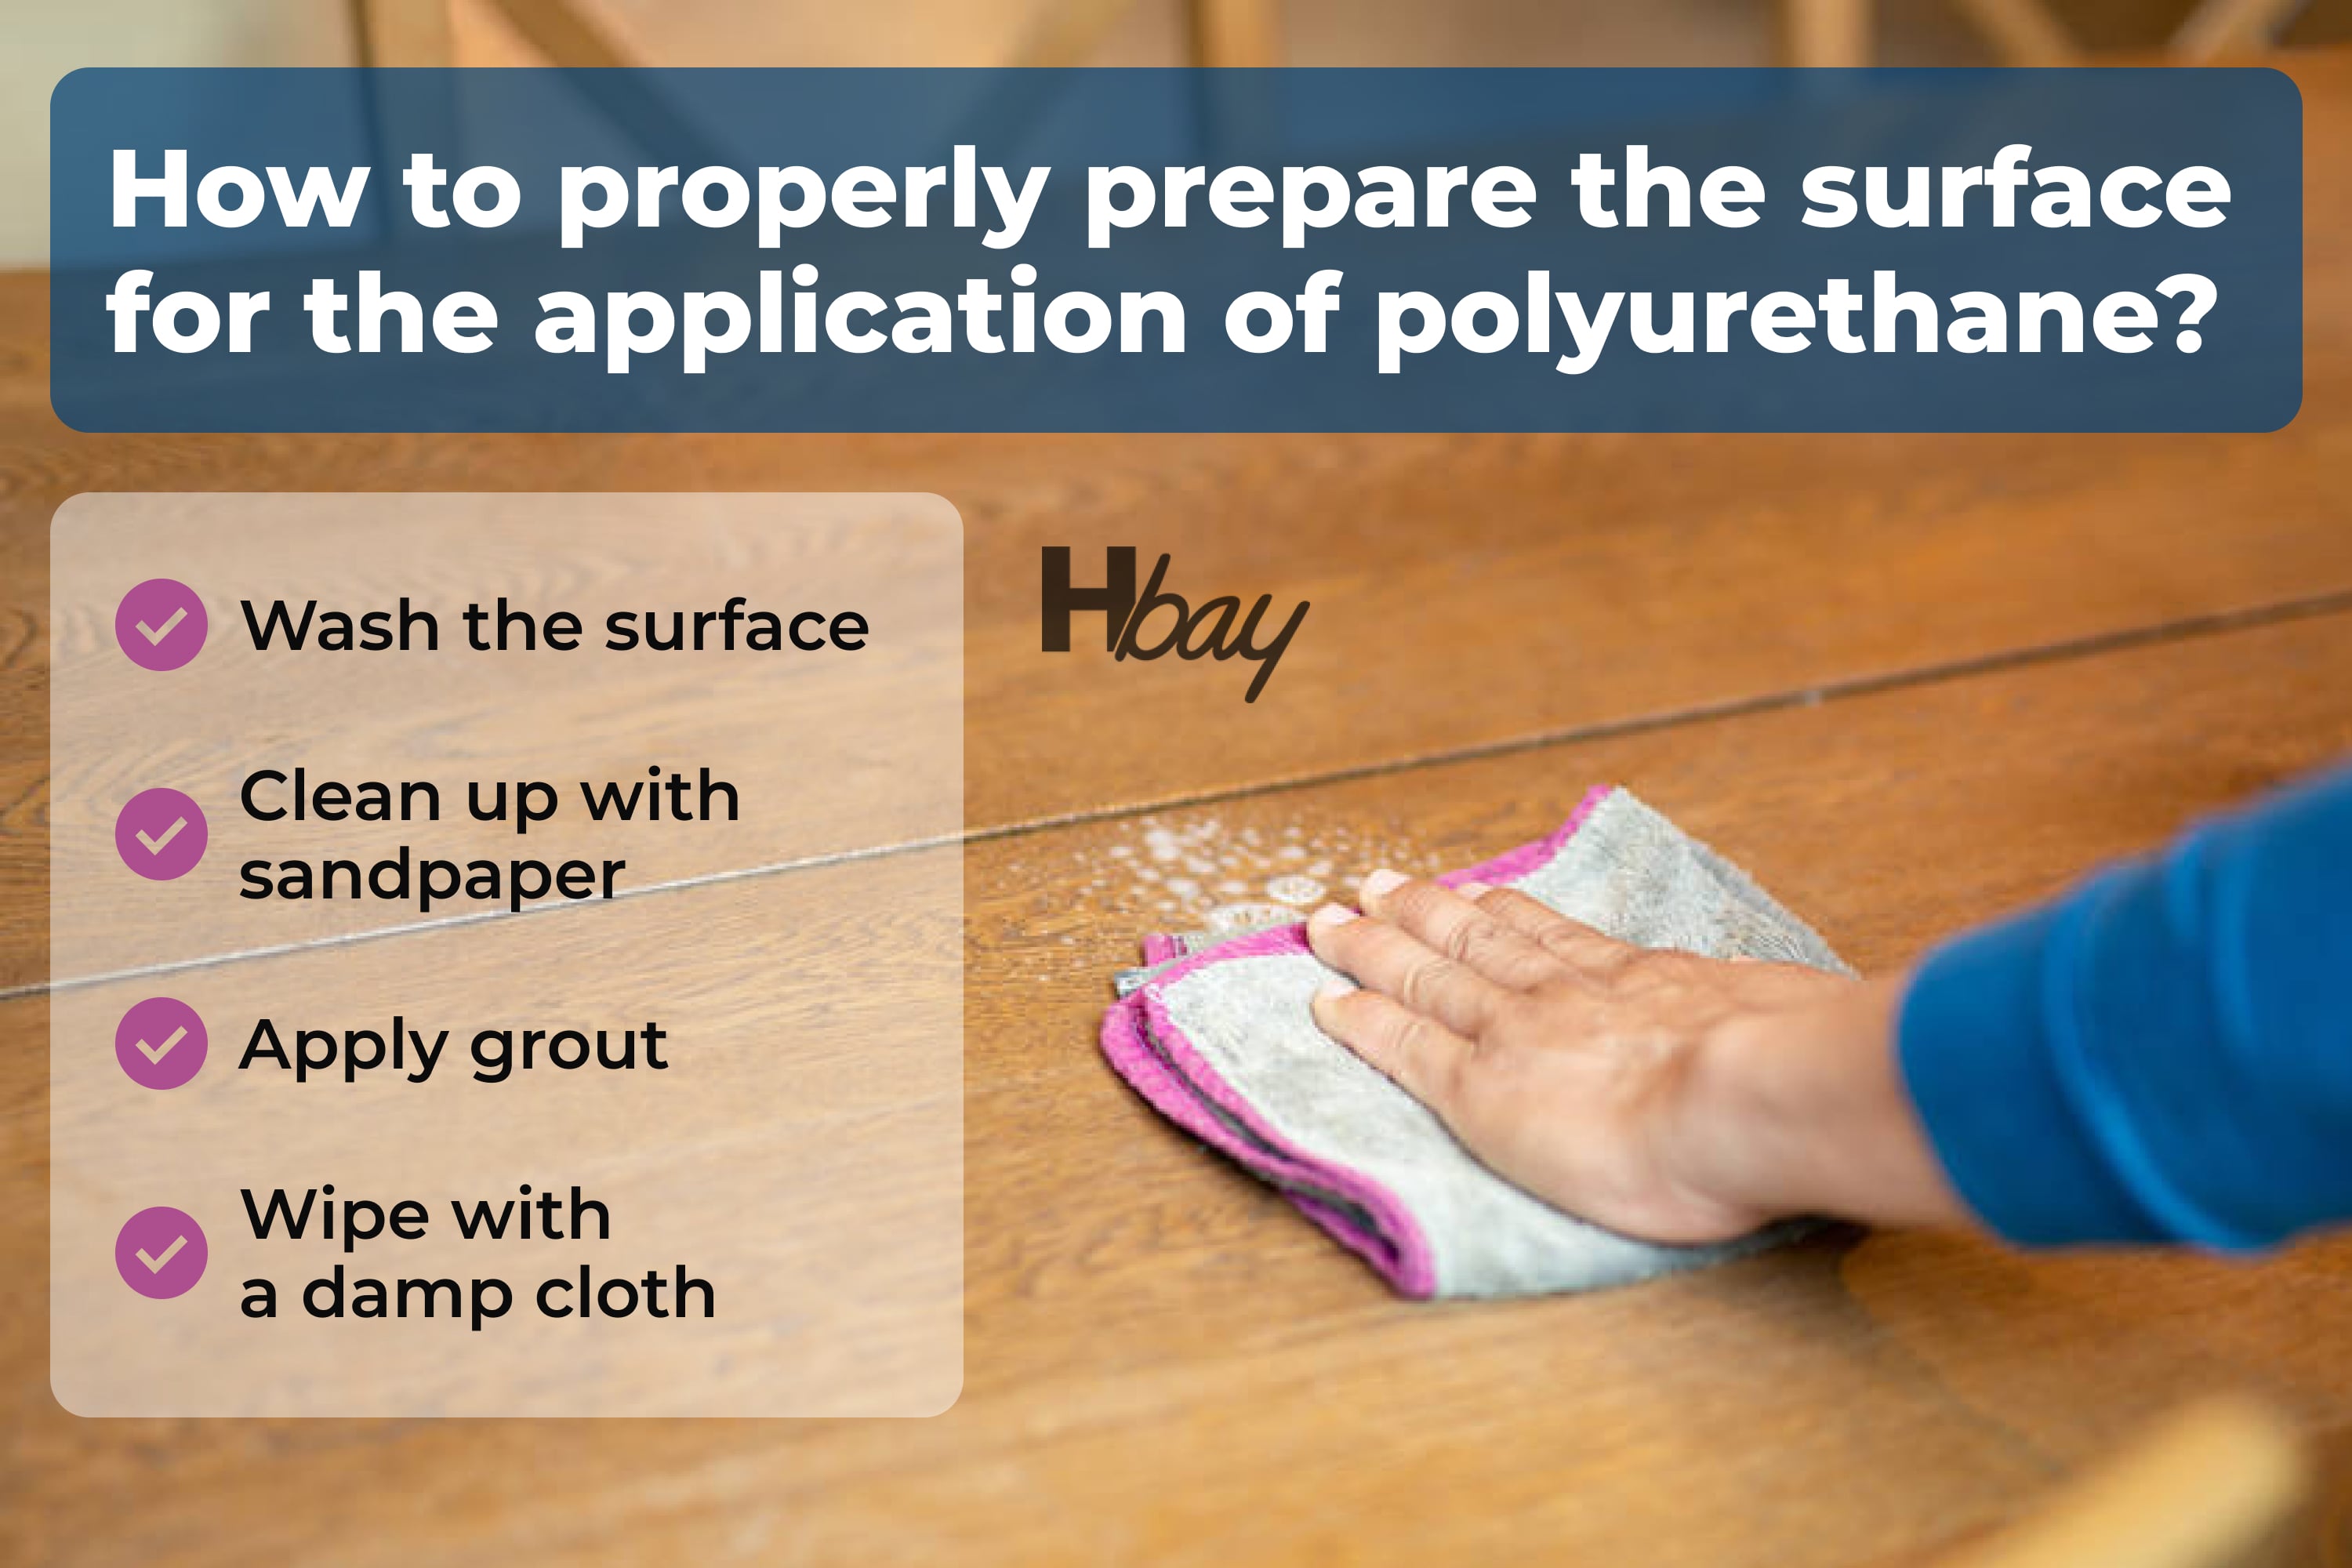 How to properly prepare the surface for the application of polyurethane